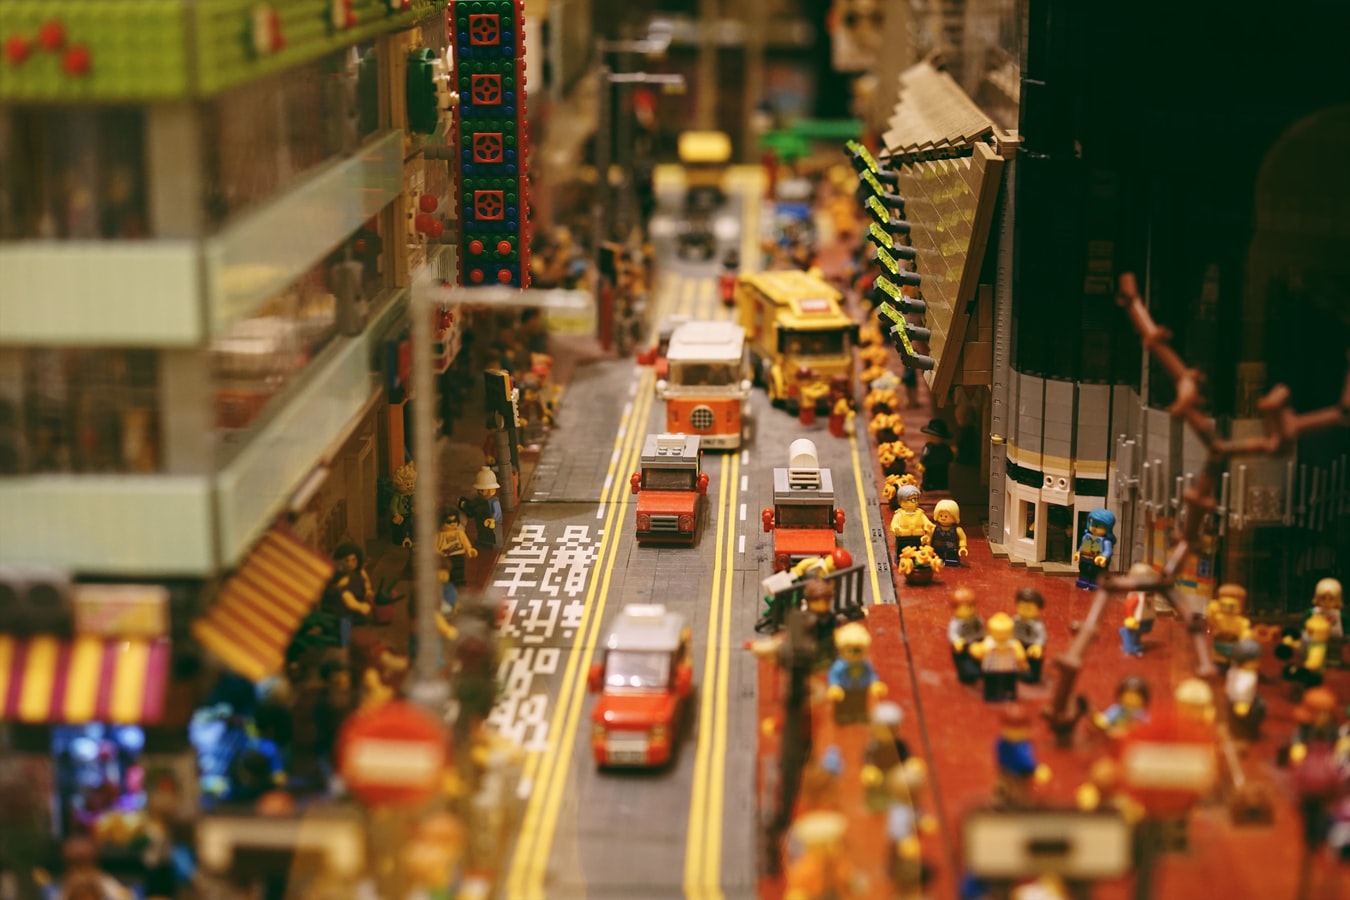 Deep Dive Into The World of Tilt Shift Photography